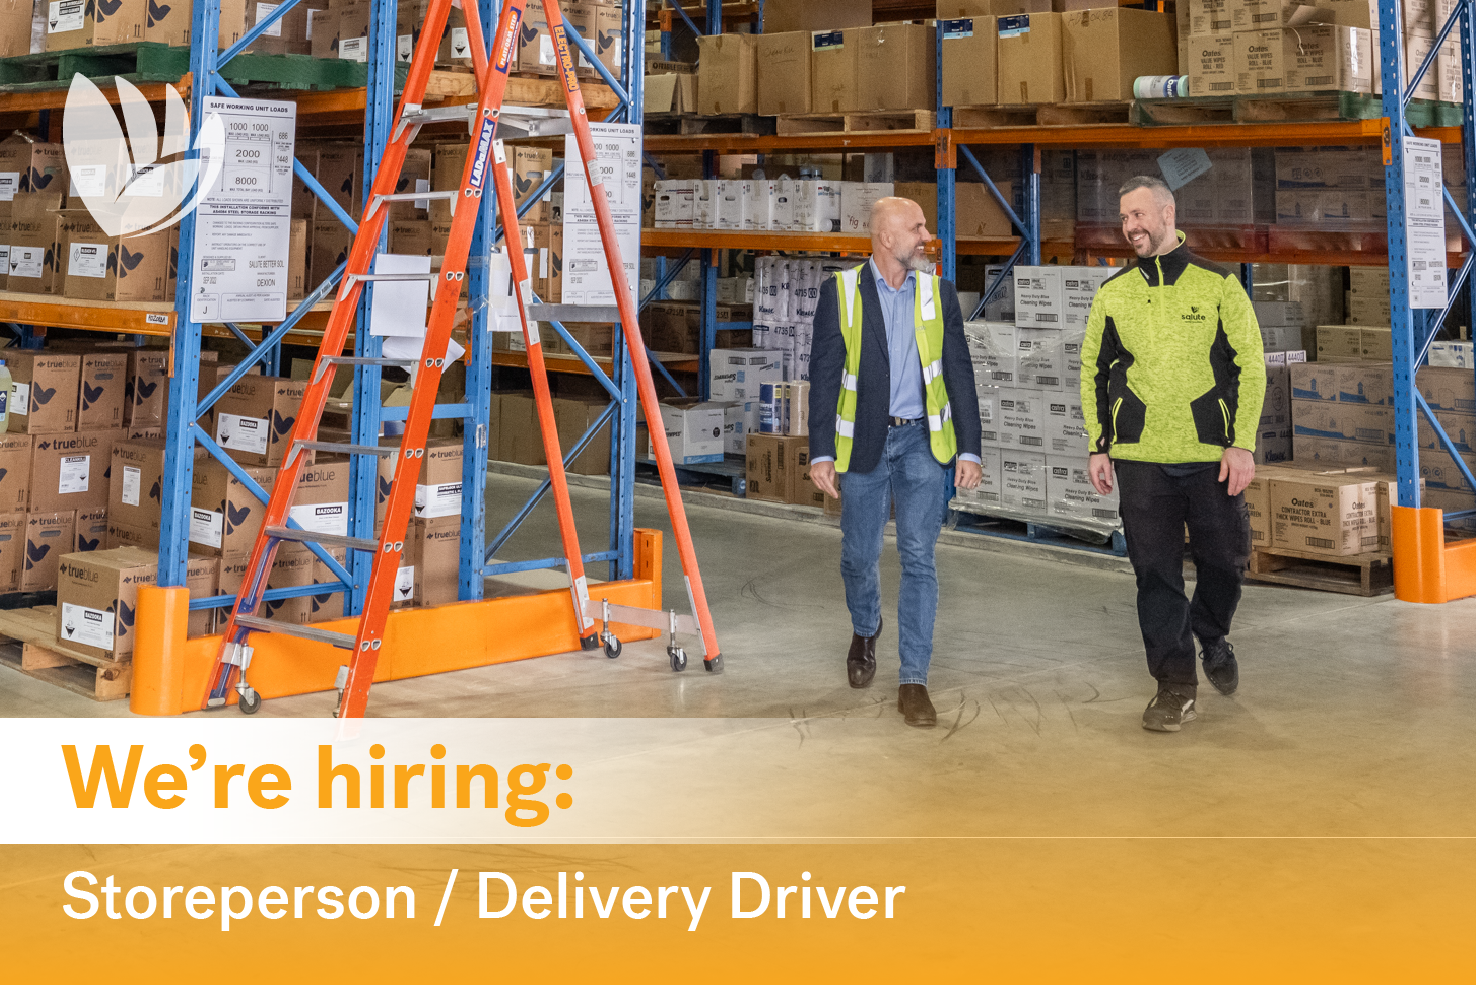 We're Hiring: Storeperson / Delivery Driver